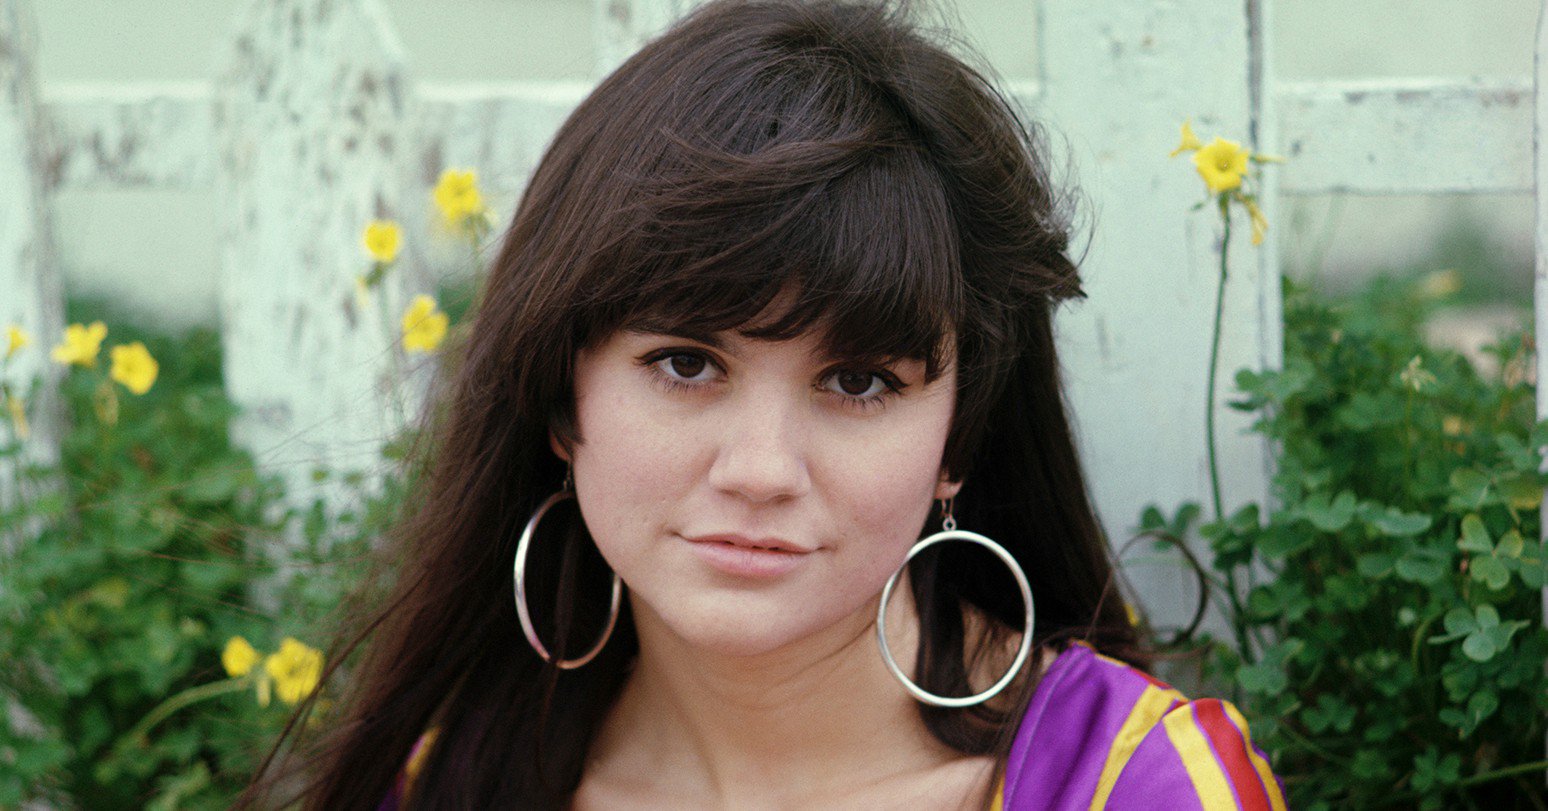 Happy 73rd birthday today to the one & only Linda Ronstadt! Born on July 15th, 1946. 